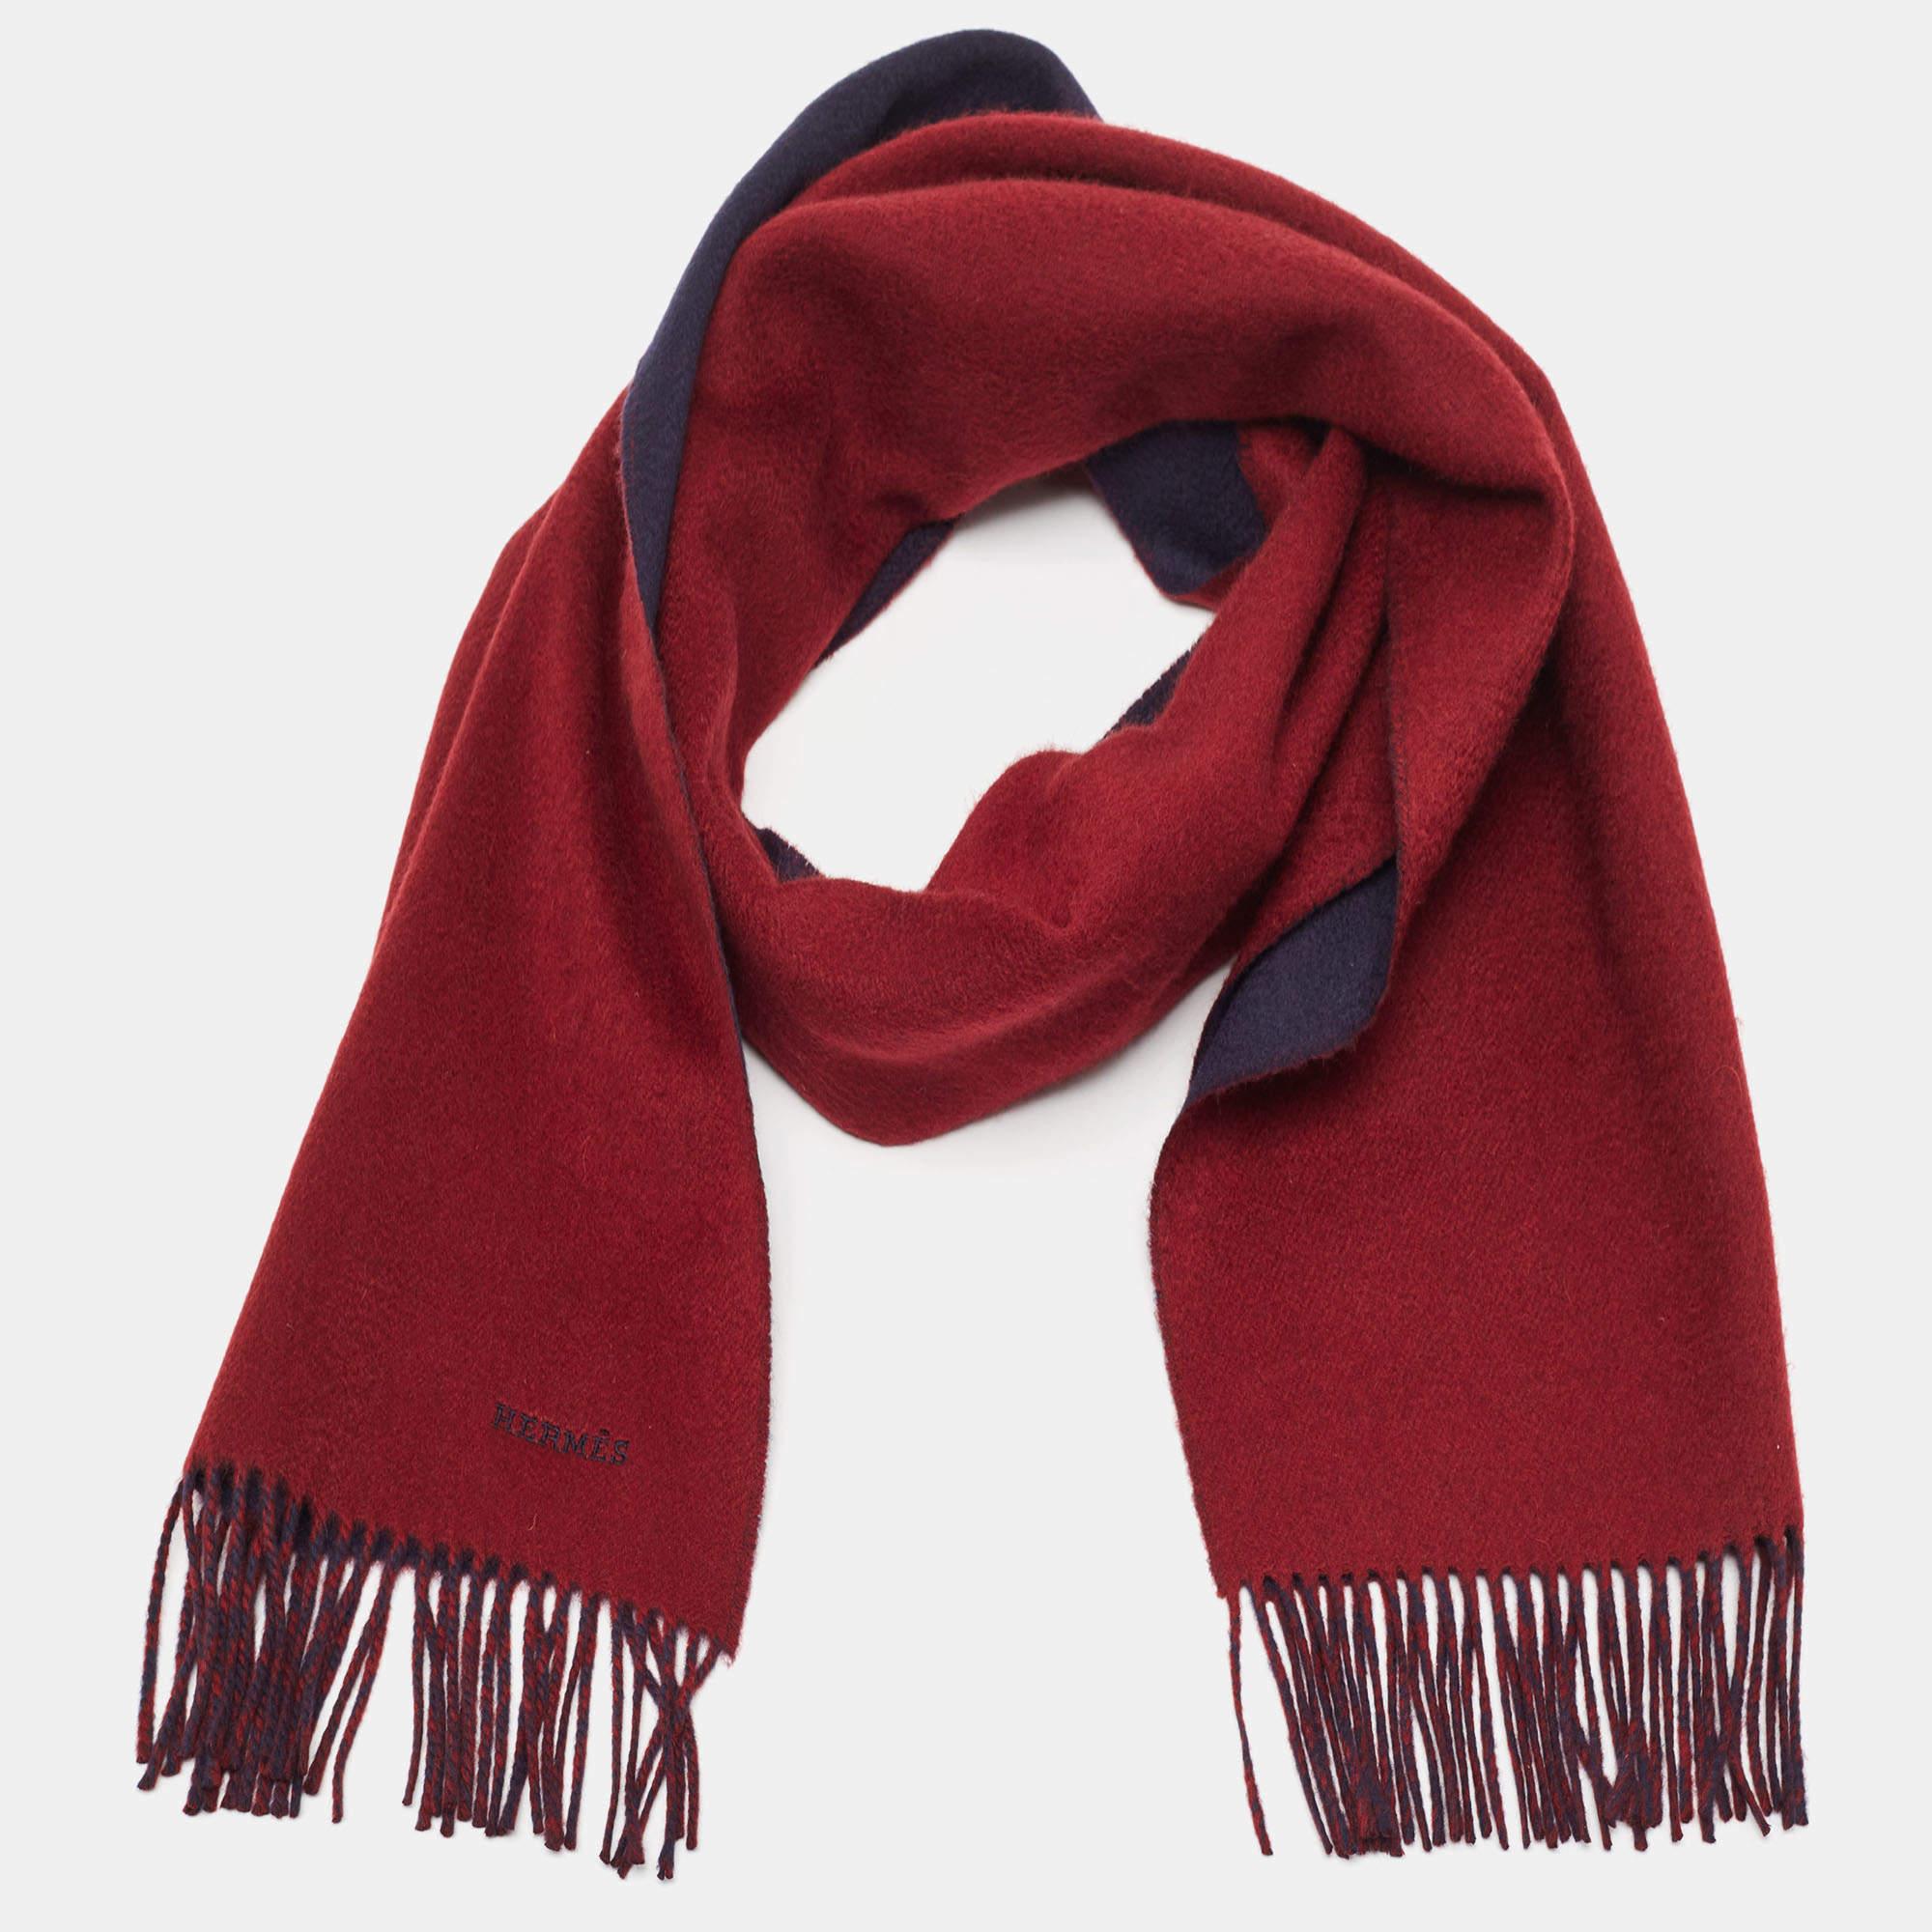 The Hermès muffler is a luxurious accessory crafted from sumptuous cashmere. Its vibrant red and navy blue hues create a striking contrast, while the fringed edges add a touch of elegance. This meticulously designed muffler exemplifies timeless